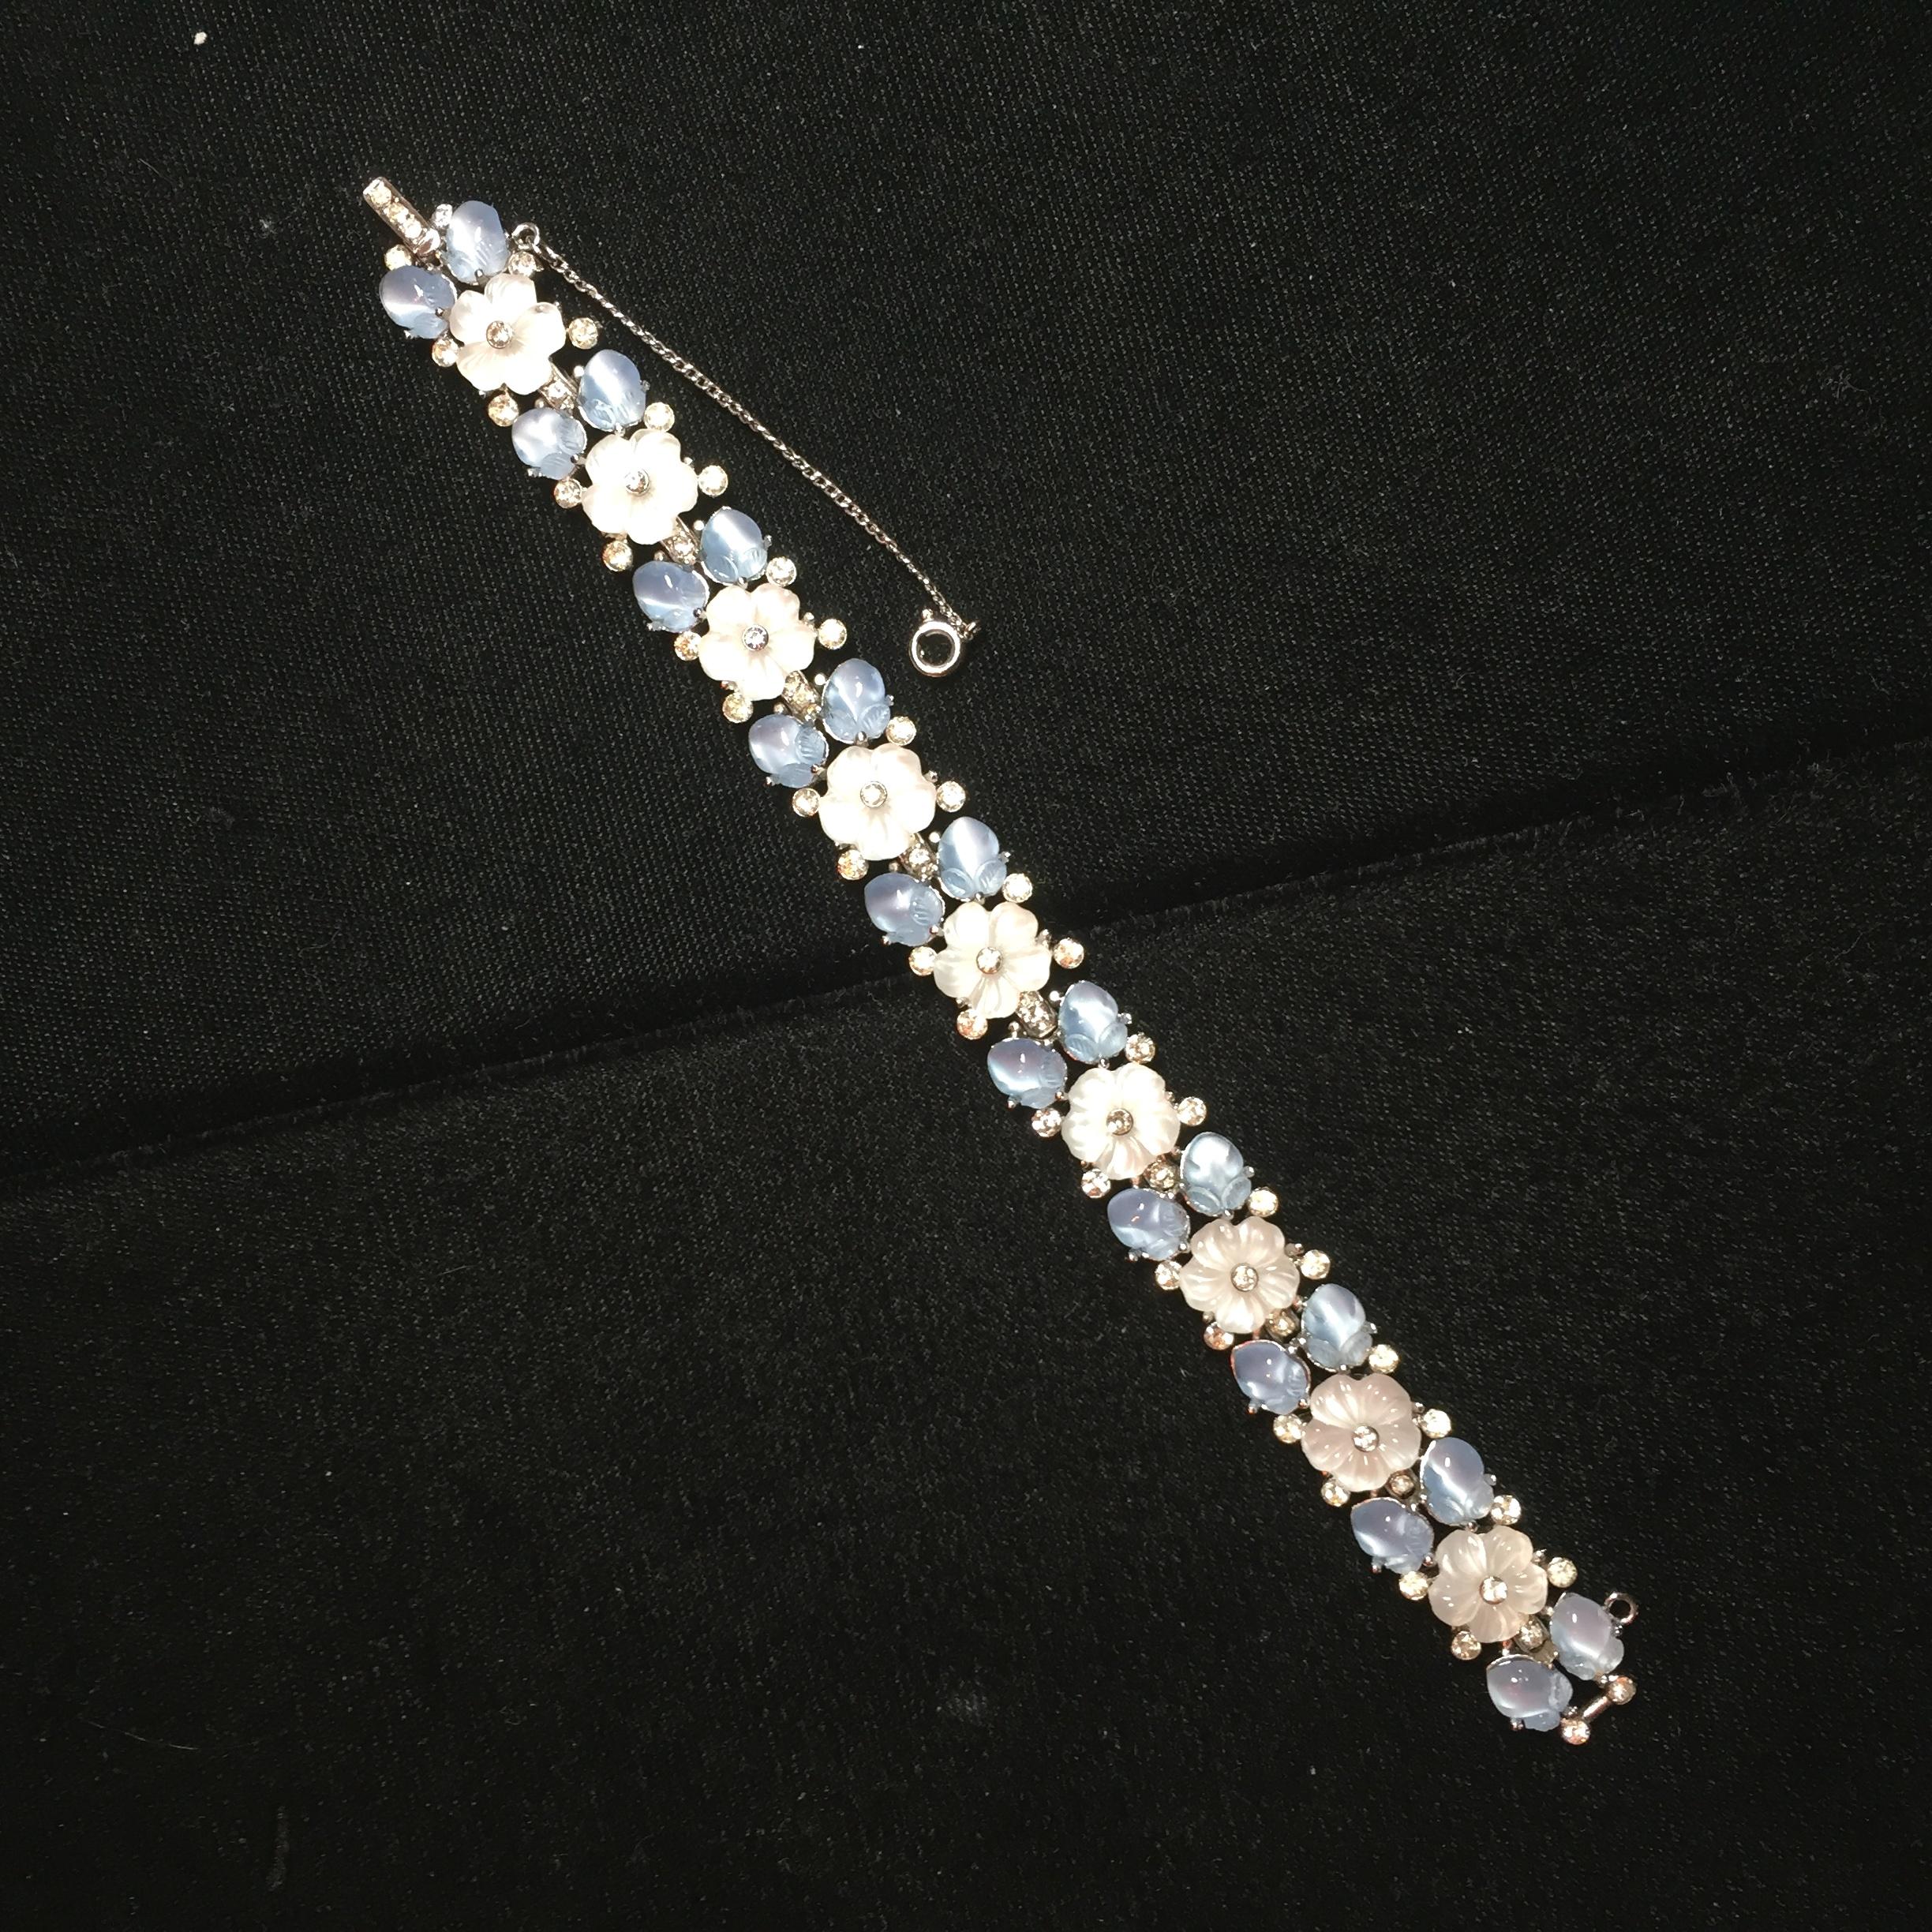 Offered here is a Crown Trifari rhodium link bracelet designed by Alfred Philippe, from the 1940s. Each heavily rhodium-plated link presents an opalescent white carved glass flower centered with a tiny clear crystal and flanked by four tiny